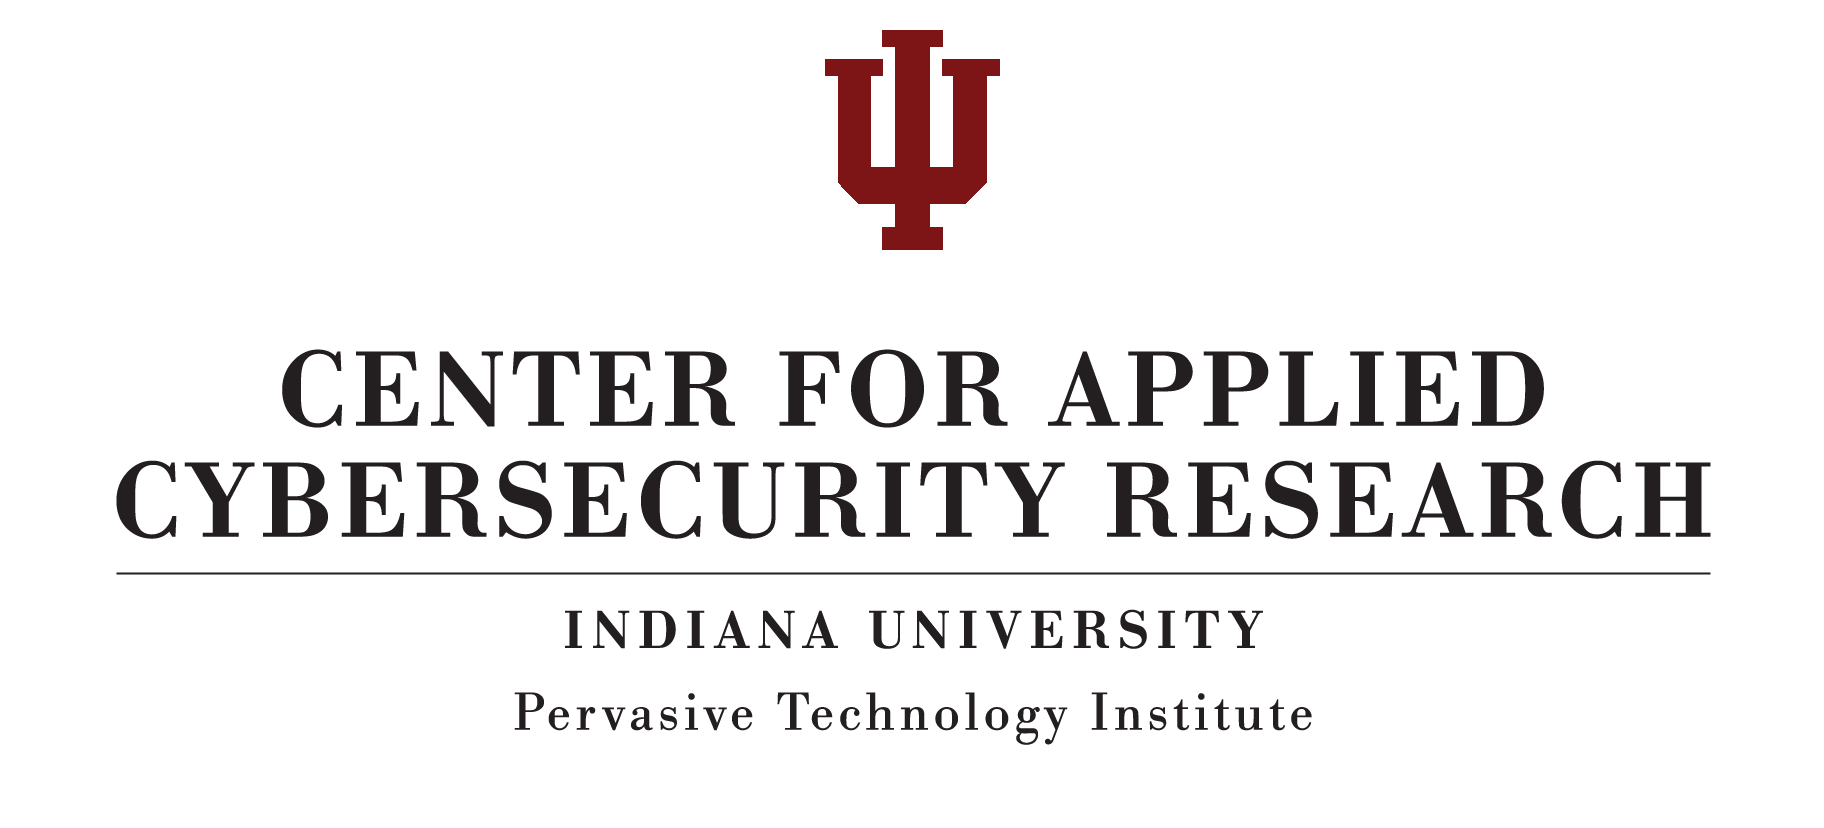 IU University Logo - SWAMP. Center for Applied Cybersecurity Research Indiana University